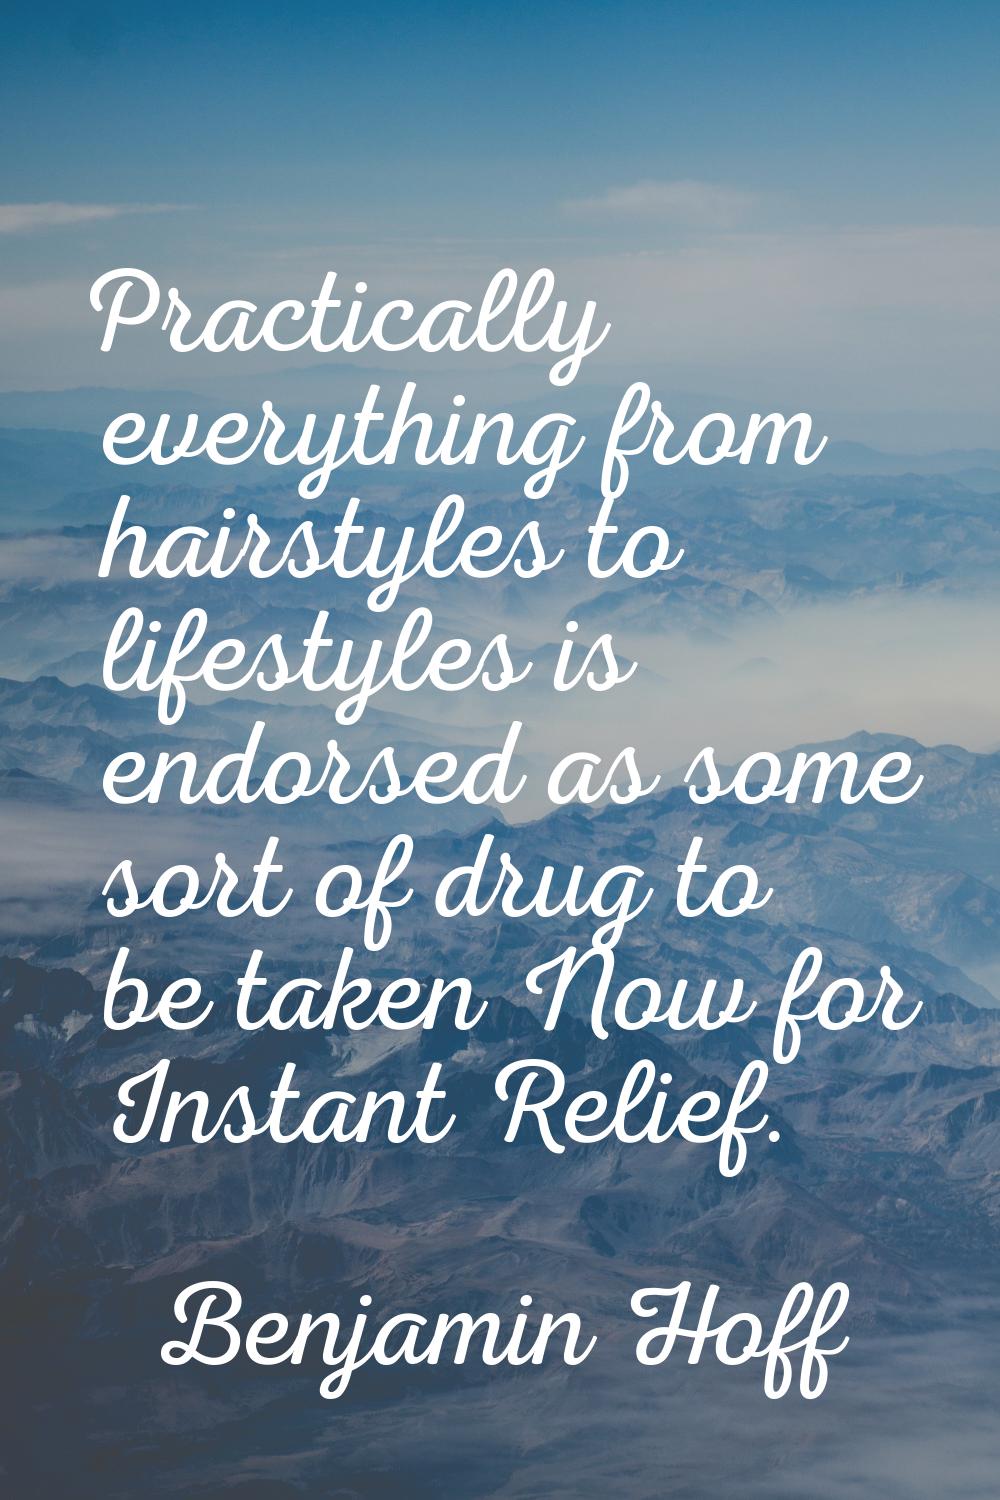 Practically everything from hairstyles to lifestyles is endorsed as some sort of drug to be taken N